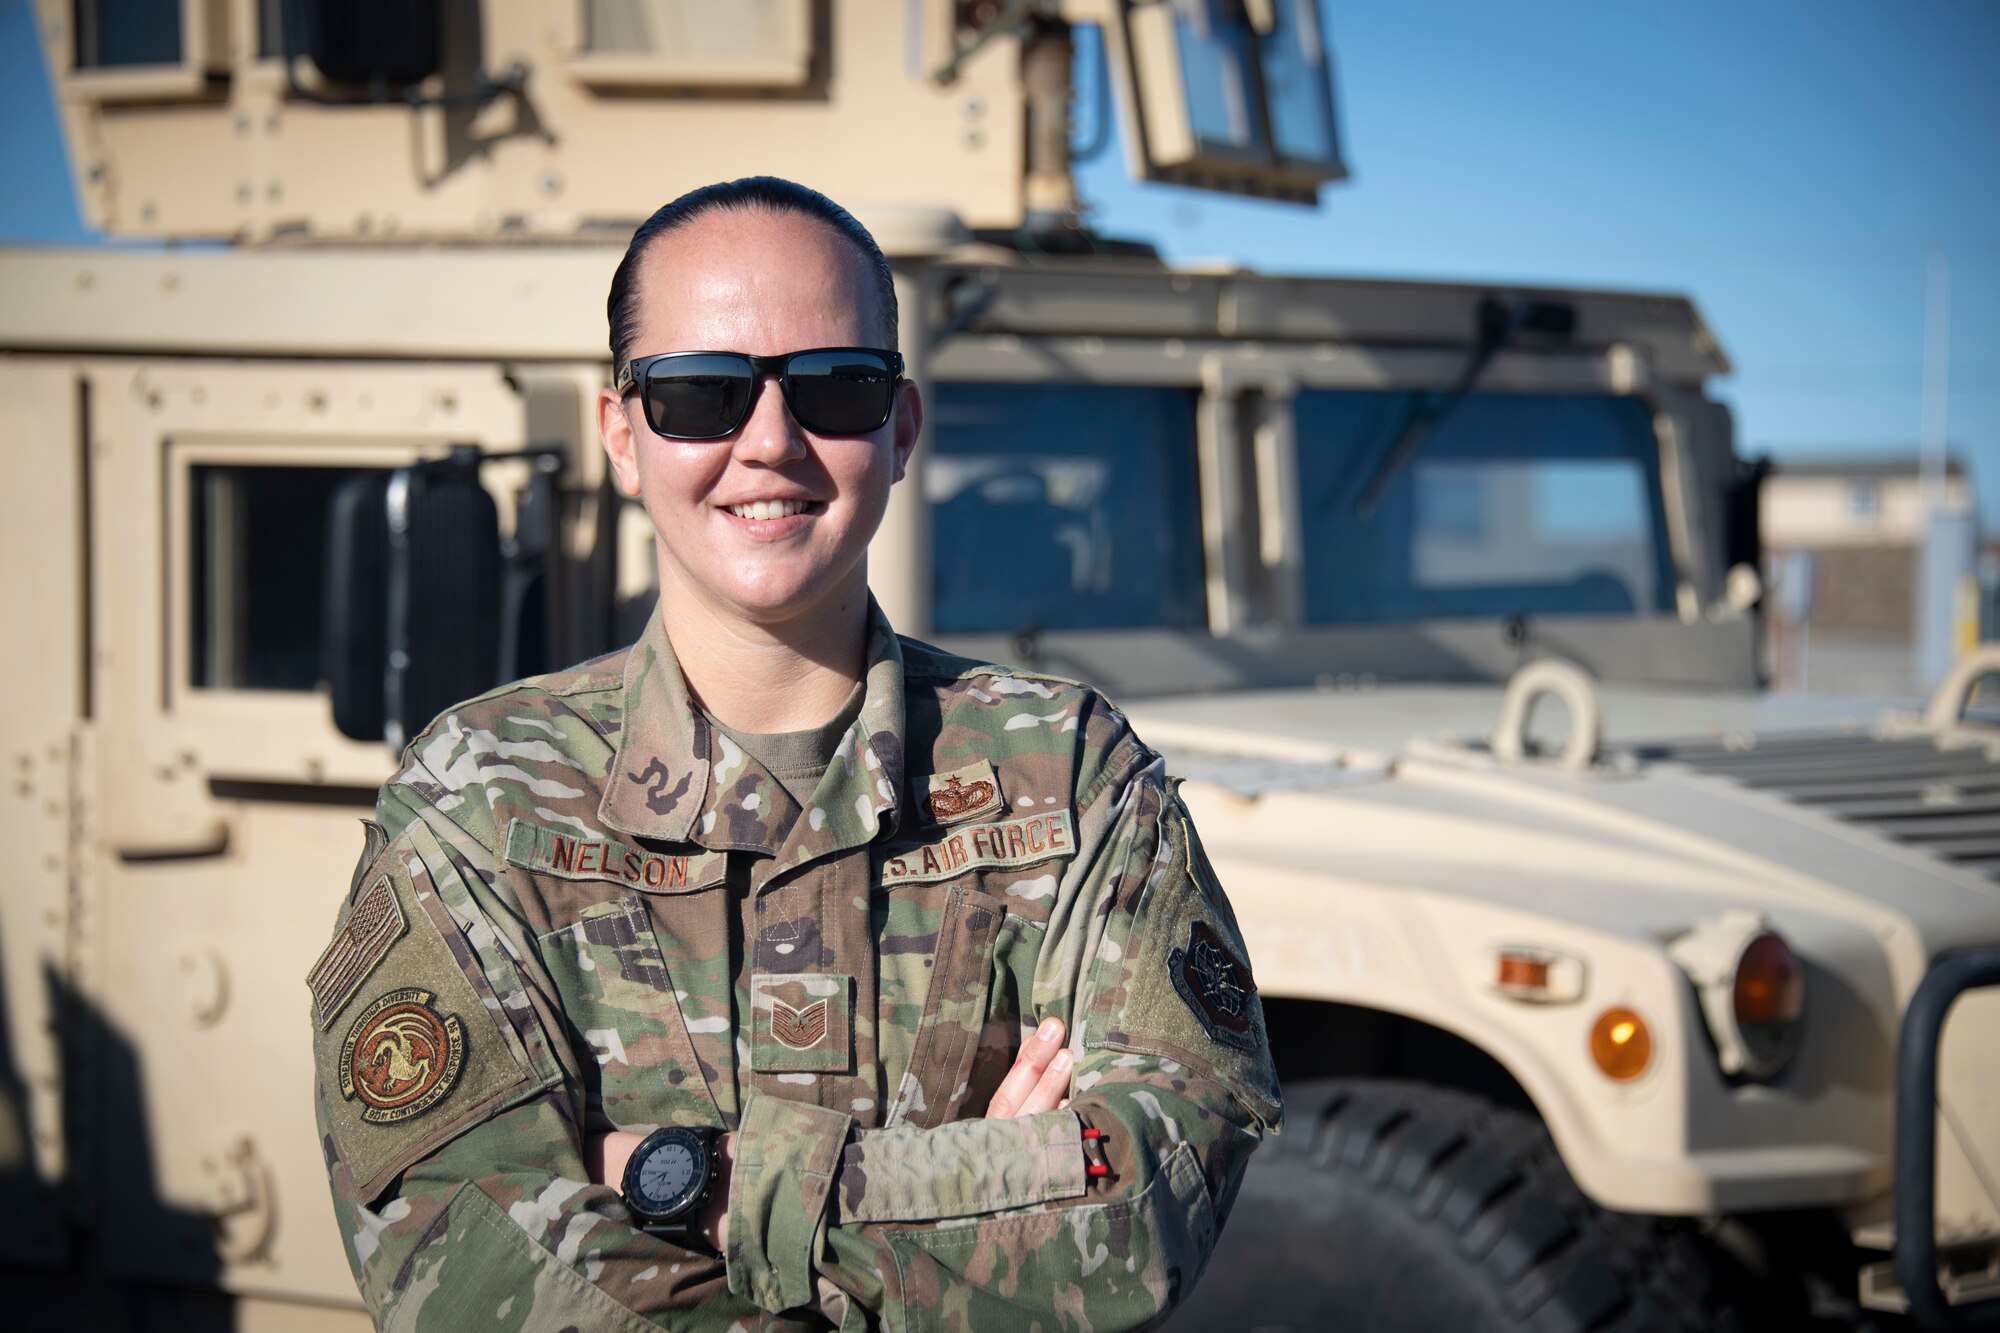 Tech. Sgt. Catherine Nelson, 921st Contingency Response Squadron security forces squad leader, poses for a photo Dec. 14, 2020, at Travis Air Force Base, California. When she began her career in security forces, she knew the job had been traditionally male-dominated in the past. And although this has changed over the years, Nelson said gender stereotyping can still happen in the military. (Photo by Master Sgt. Liliana Moreno)